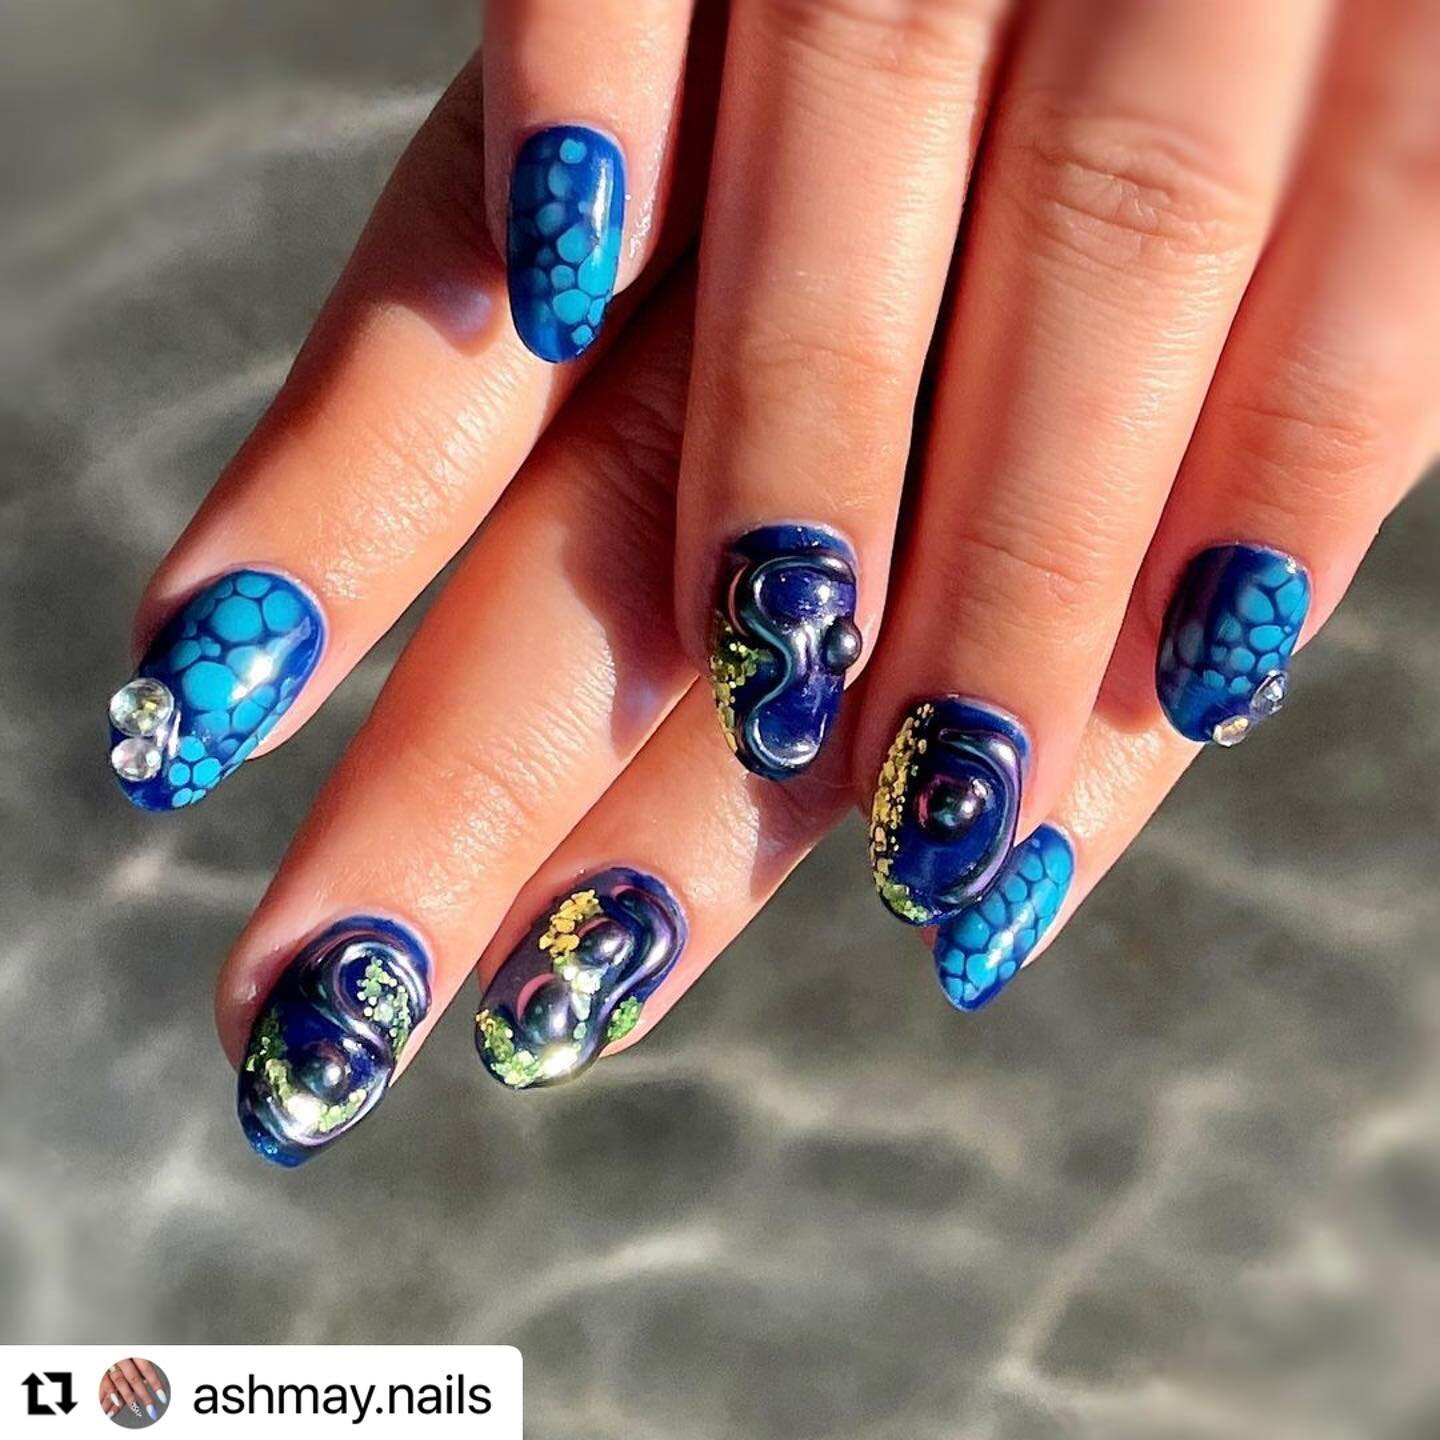 #Repost @ashmay.nails with @use.repost
・・・
This mermaid theme feels like summer, and I&rsquo;m so ready ☀️

Short round Gel-X with level 3 art featuring 3D, Chrome, Blooming Gel, and Rhinestones 

#gelxnails #gelx #gelxtension #gelextensions #nails #